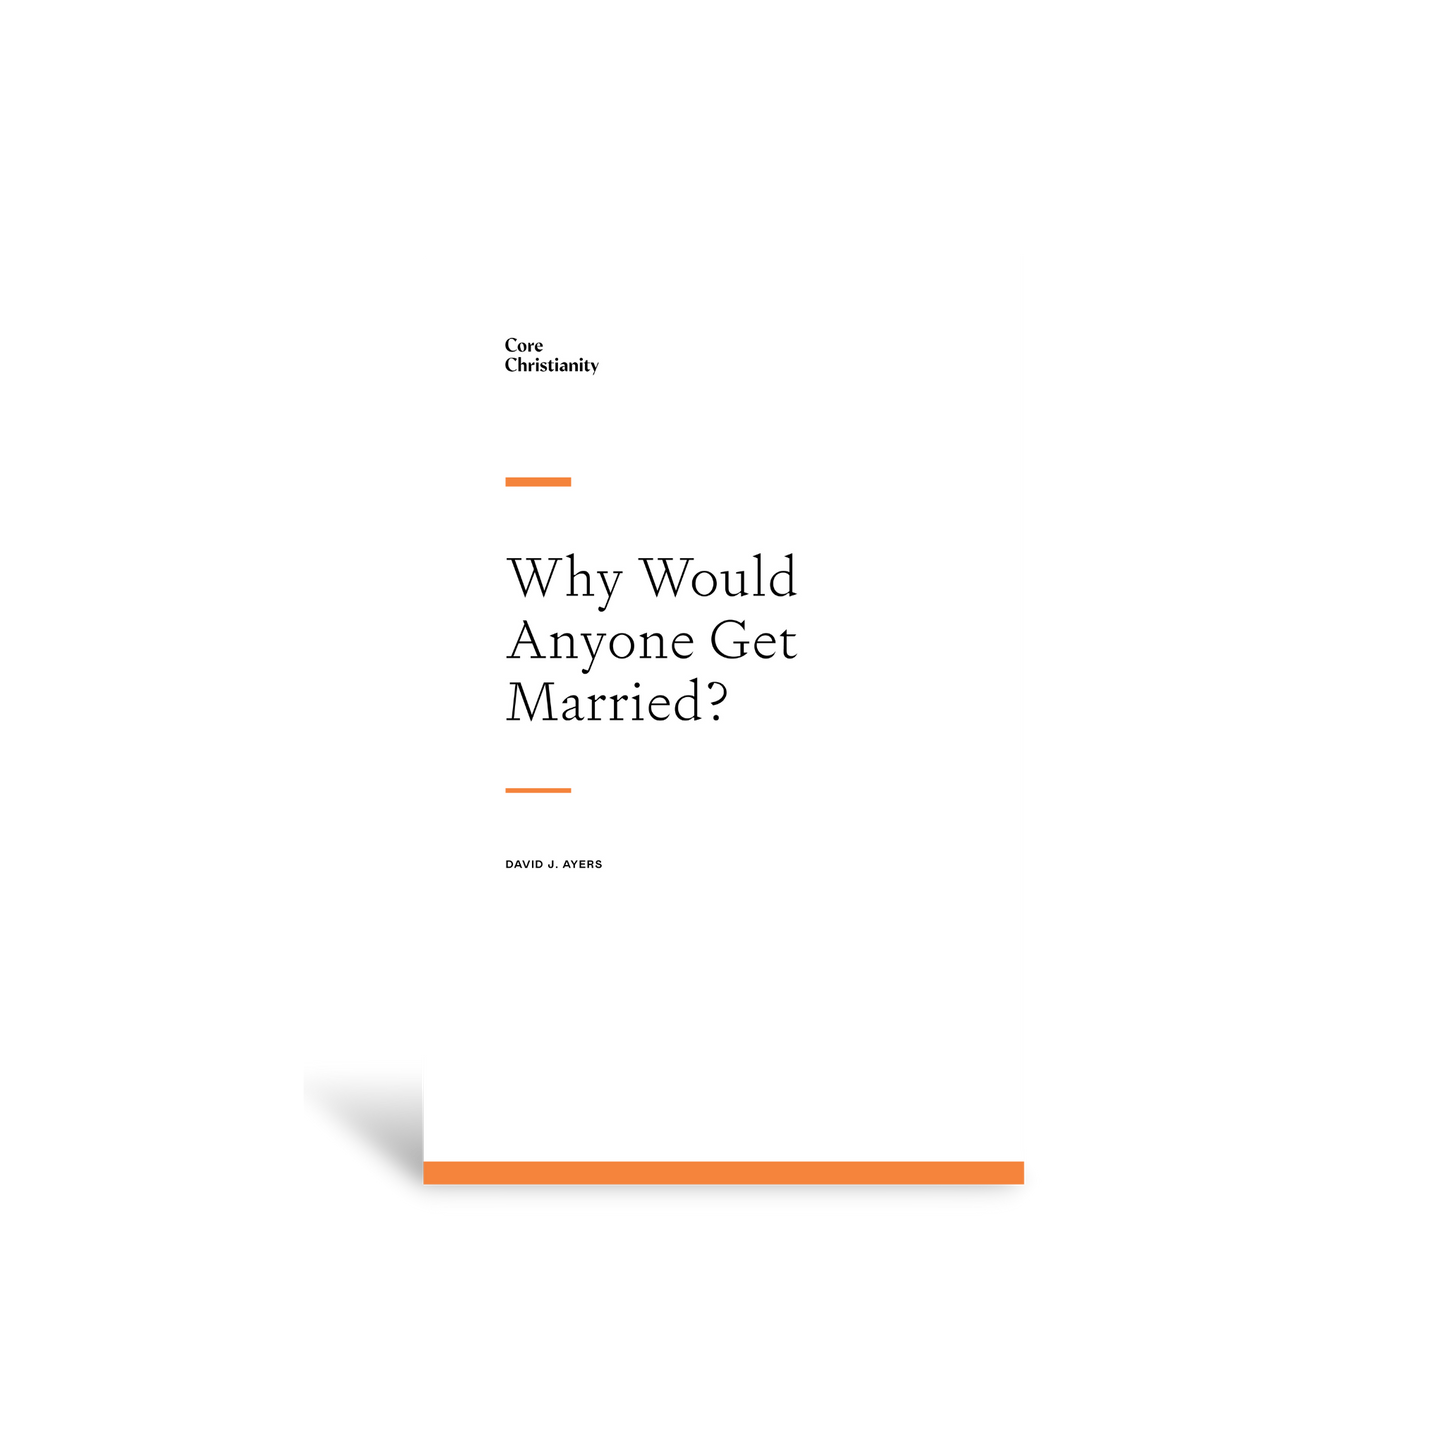 Why Would Anyone Get Married?